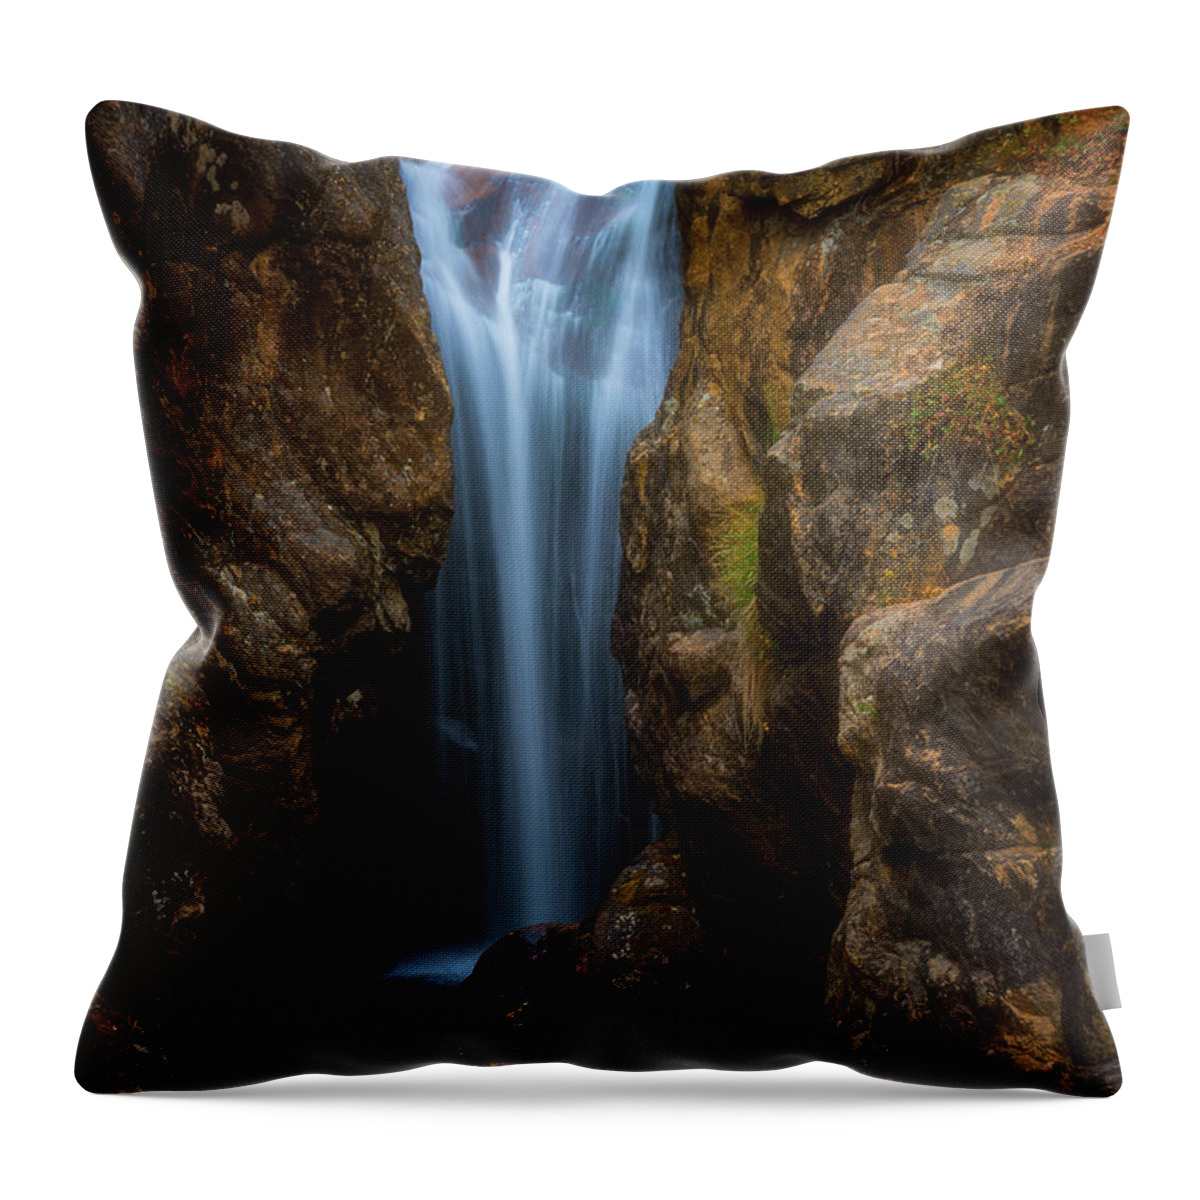 Colorado Throw Pillow featuring the photograph Chasm Falls by Darren White